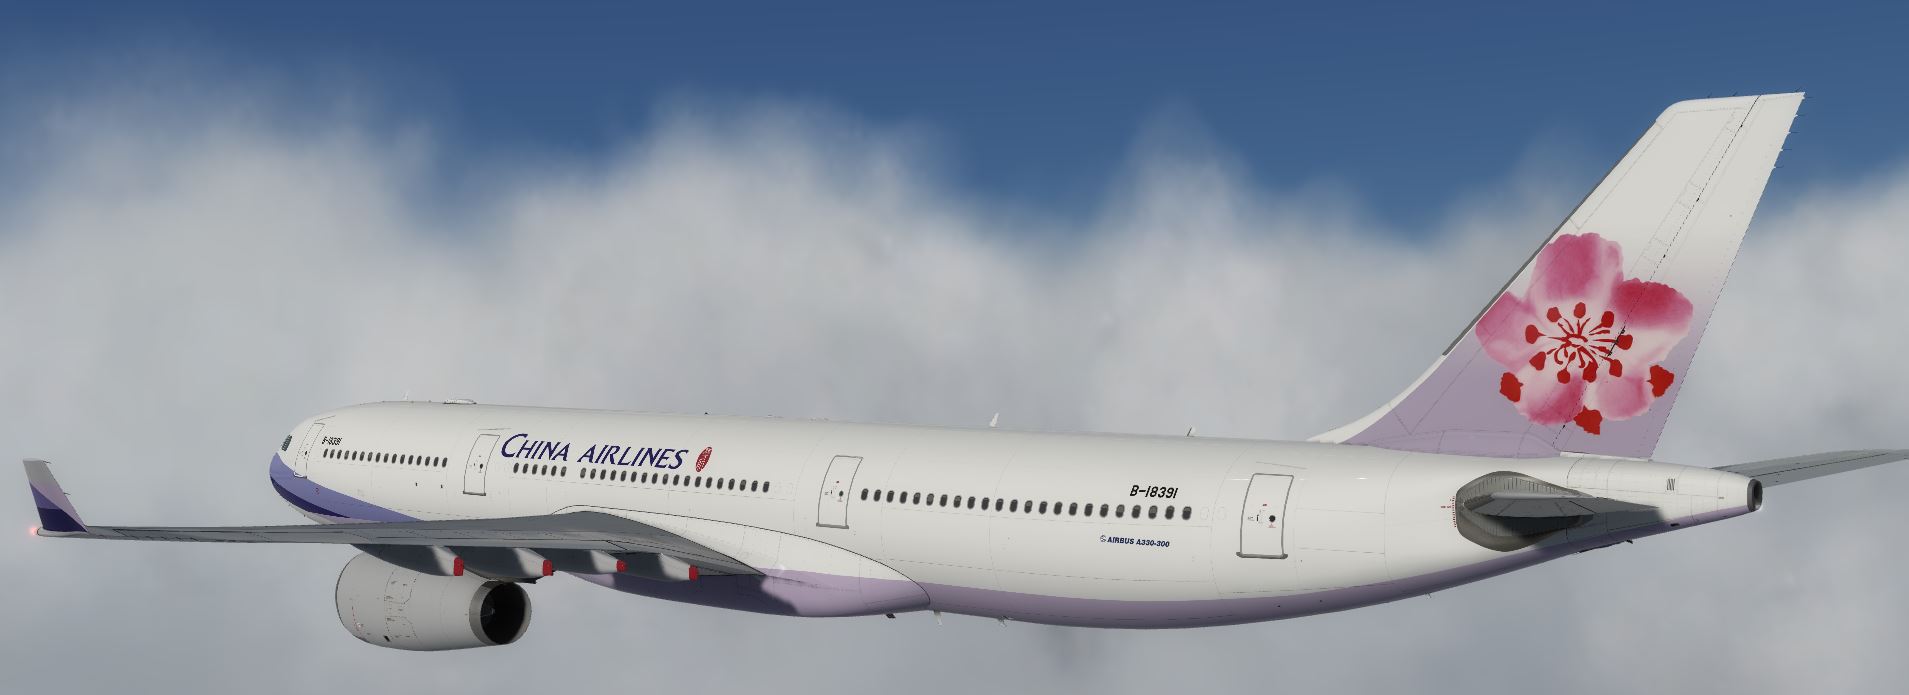 AS A330 ChinaAirline-2780 